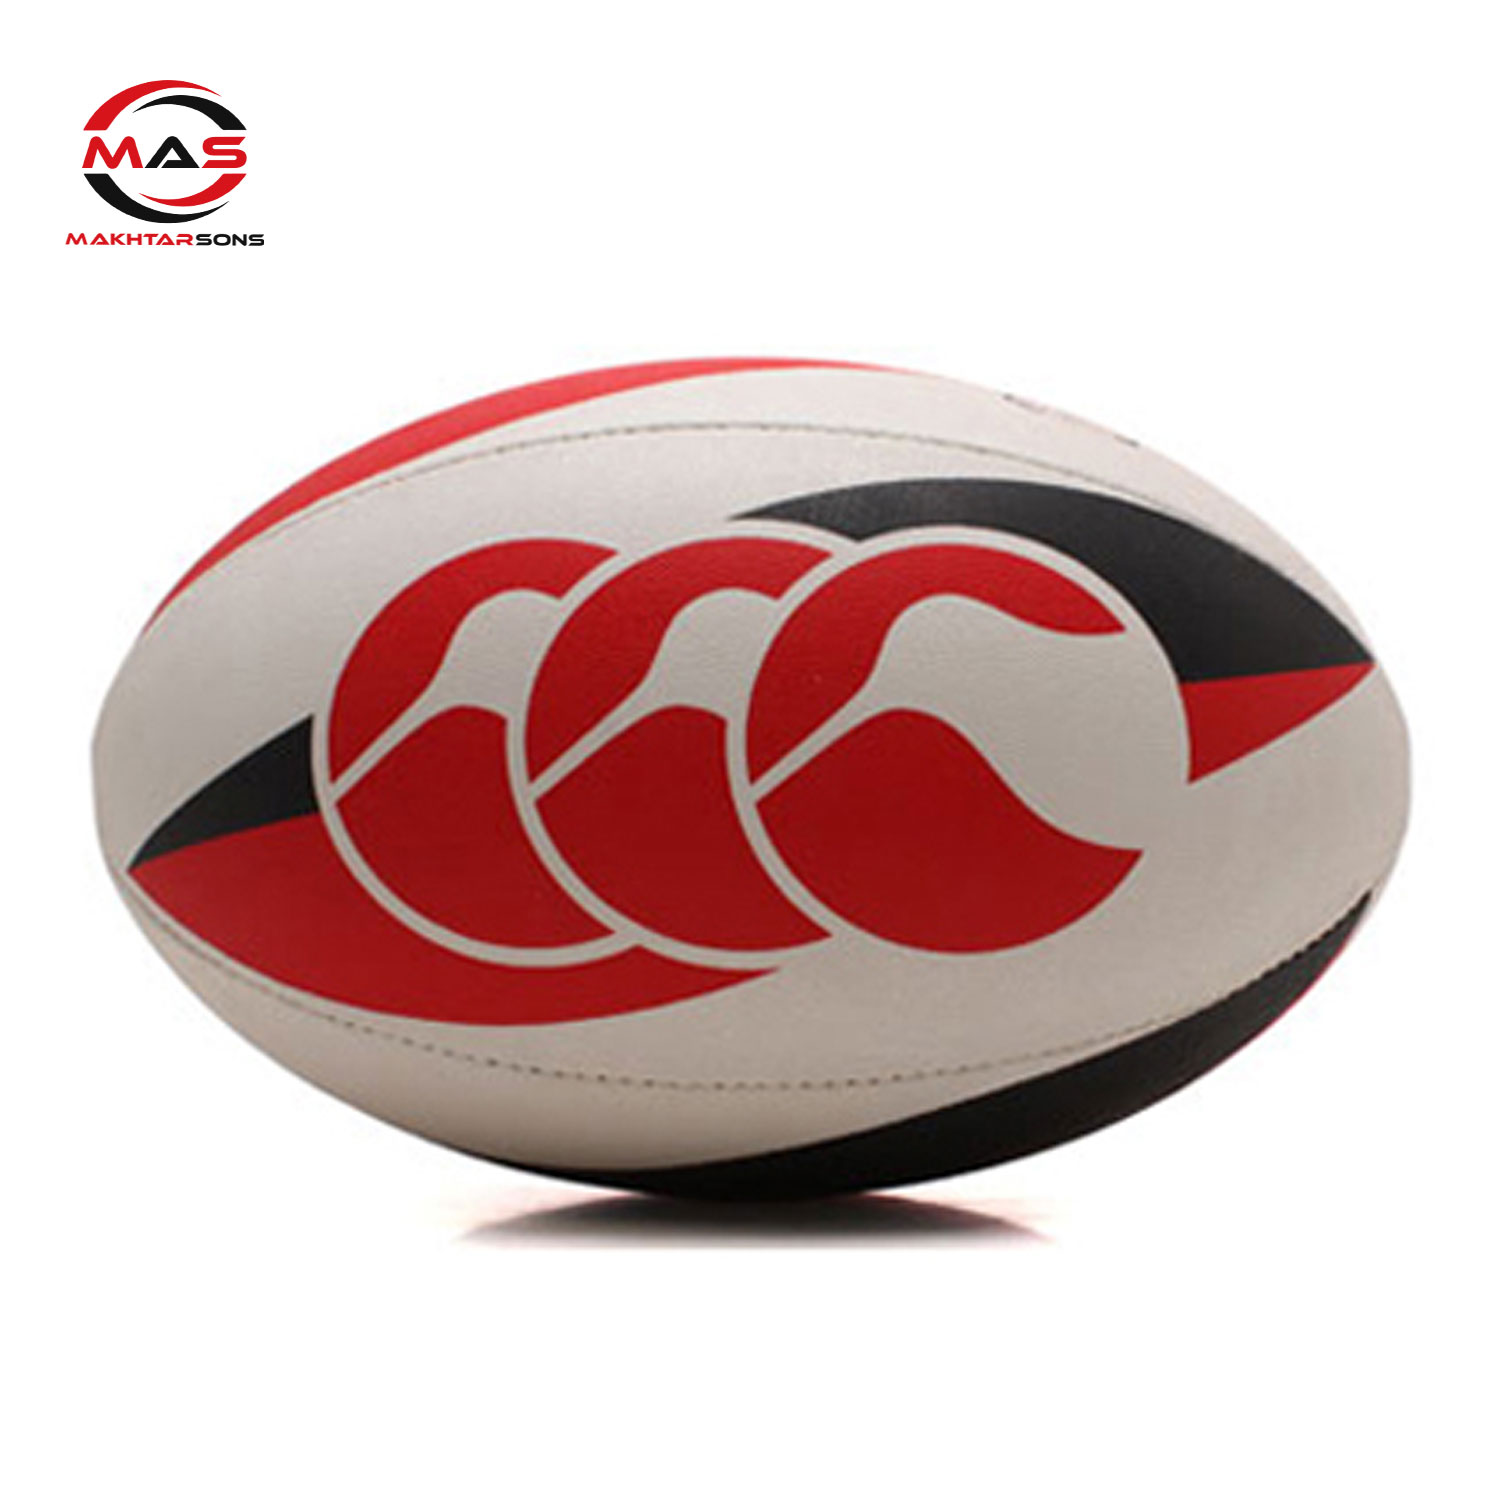 RUGBY BALL | MAS 433